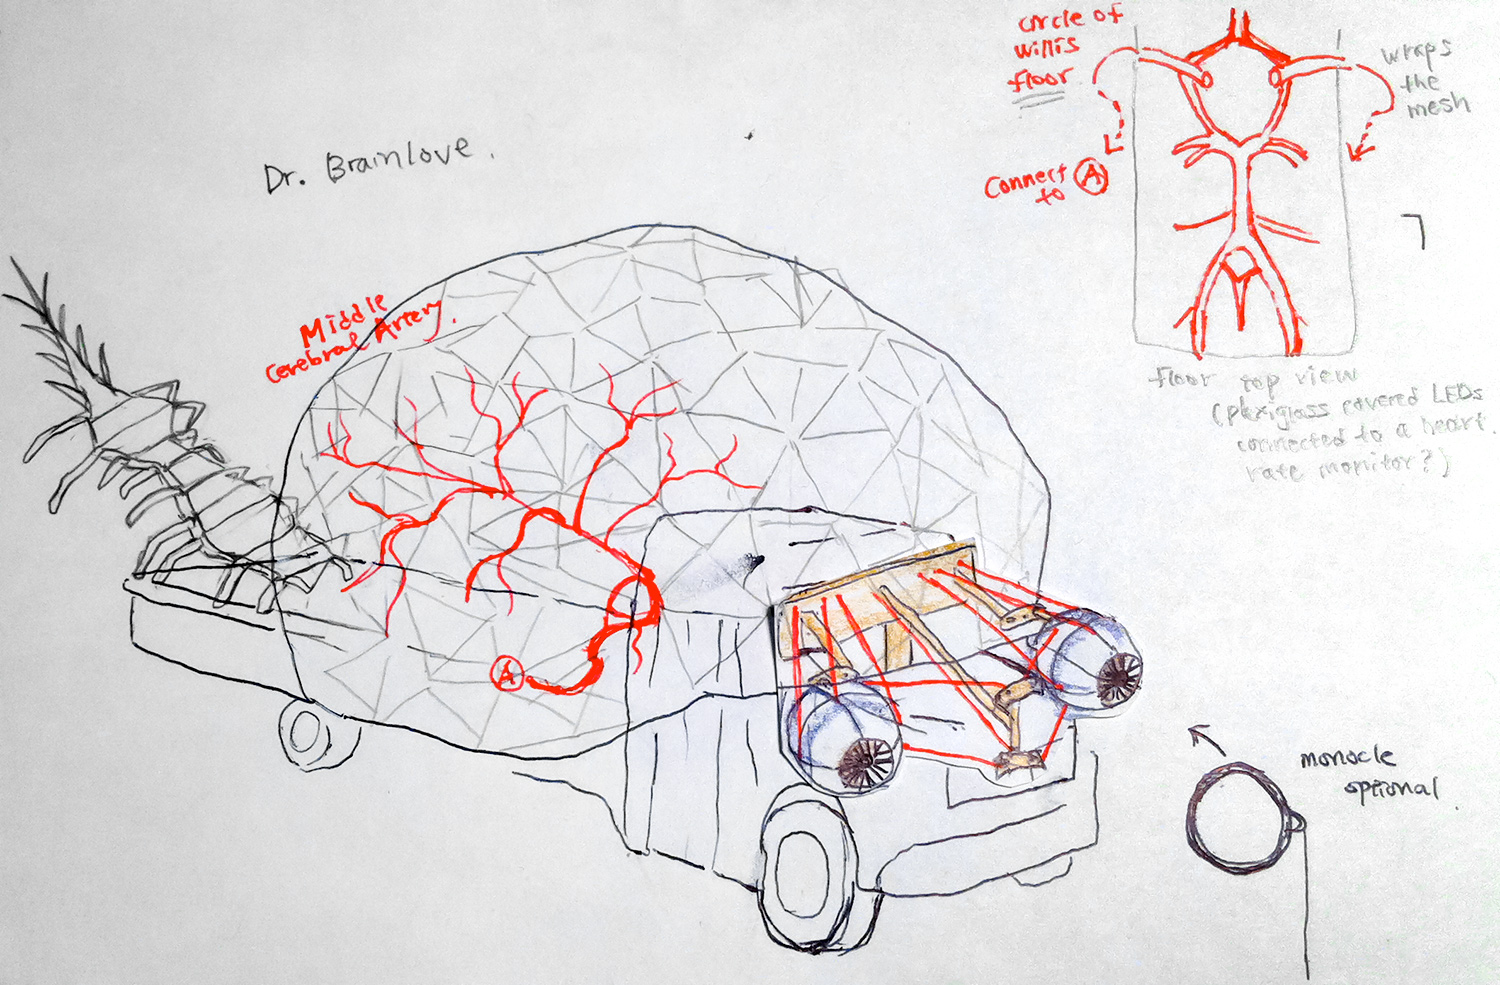  A pen sketch in black, blue, and red ink of the Dr.Brainlove prototype. The sketch depicts a geometric skull-shaped structure built upon a bus chasis, with eyeballs, spinal column, and cerebral artery. Handwritten notes provide further instructions and details such as “monocle optional.” 